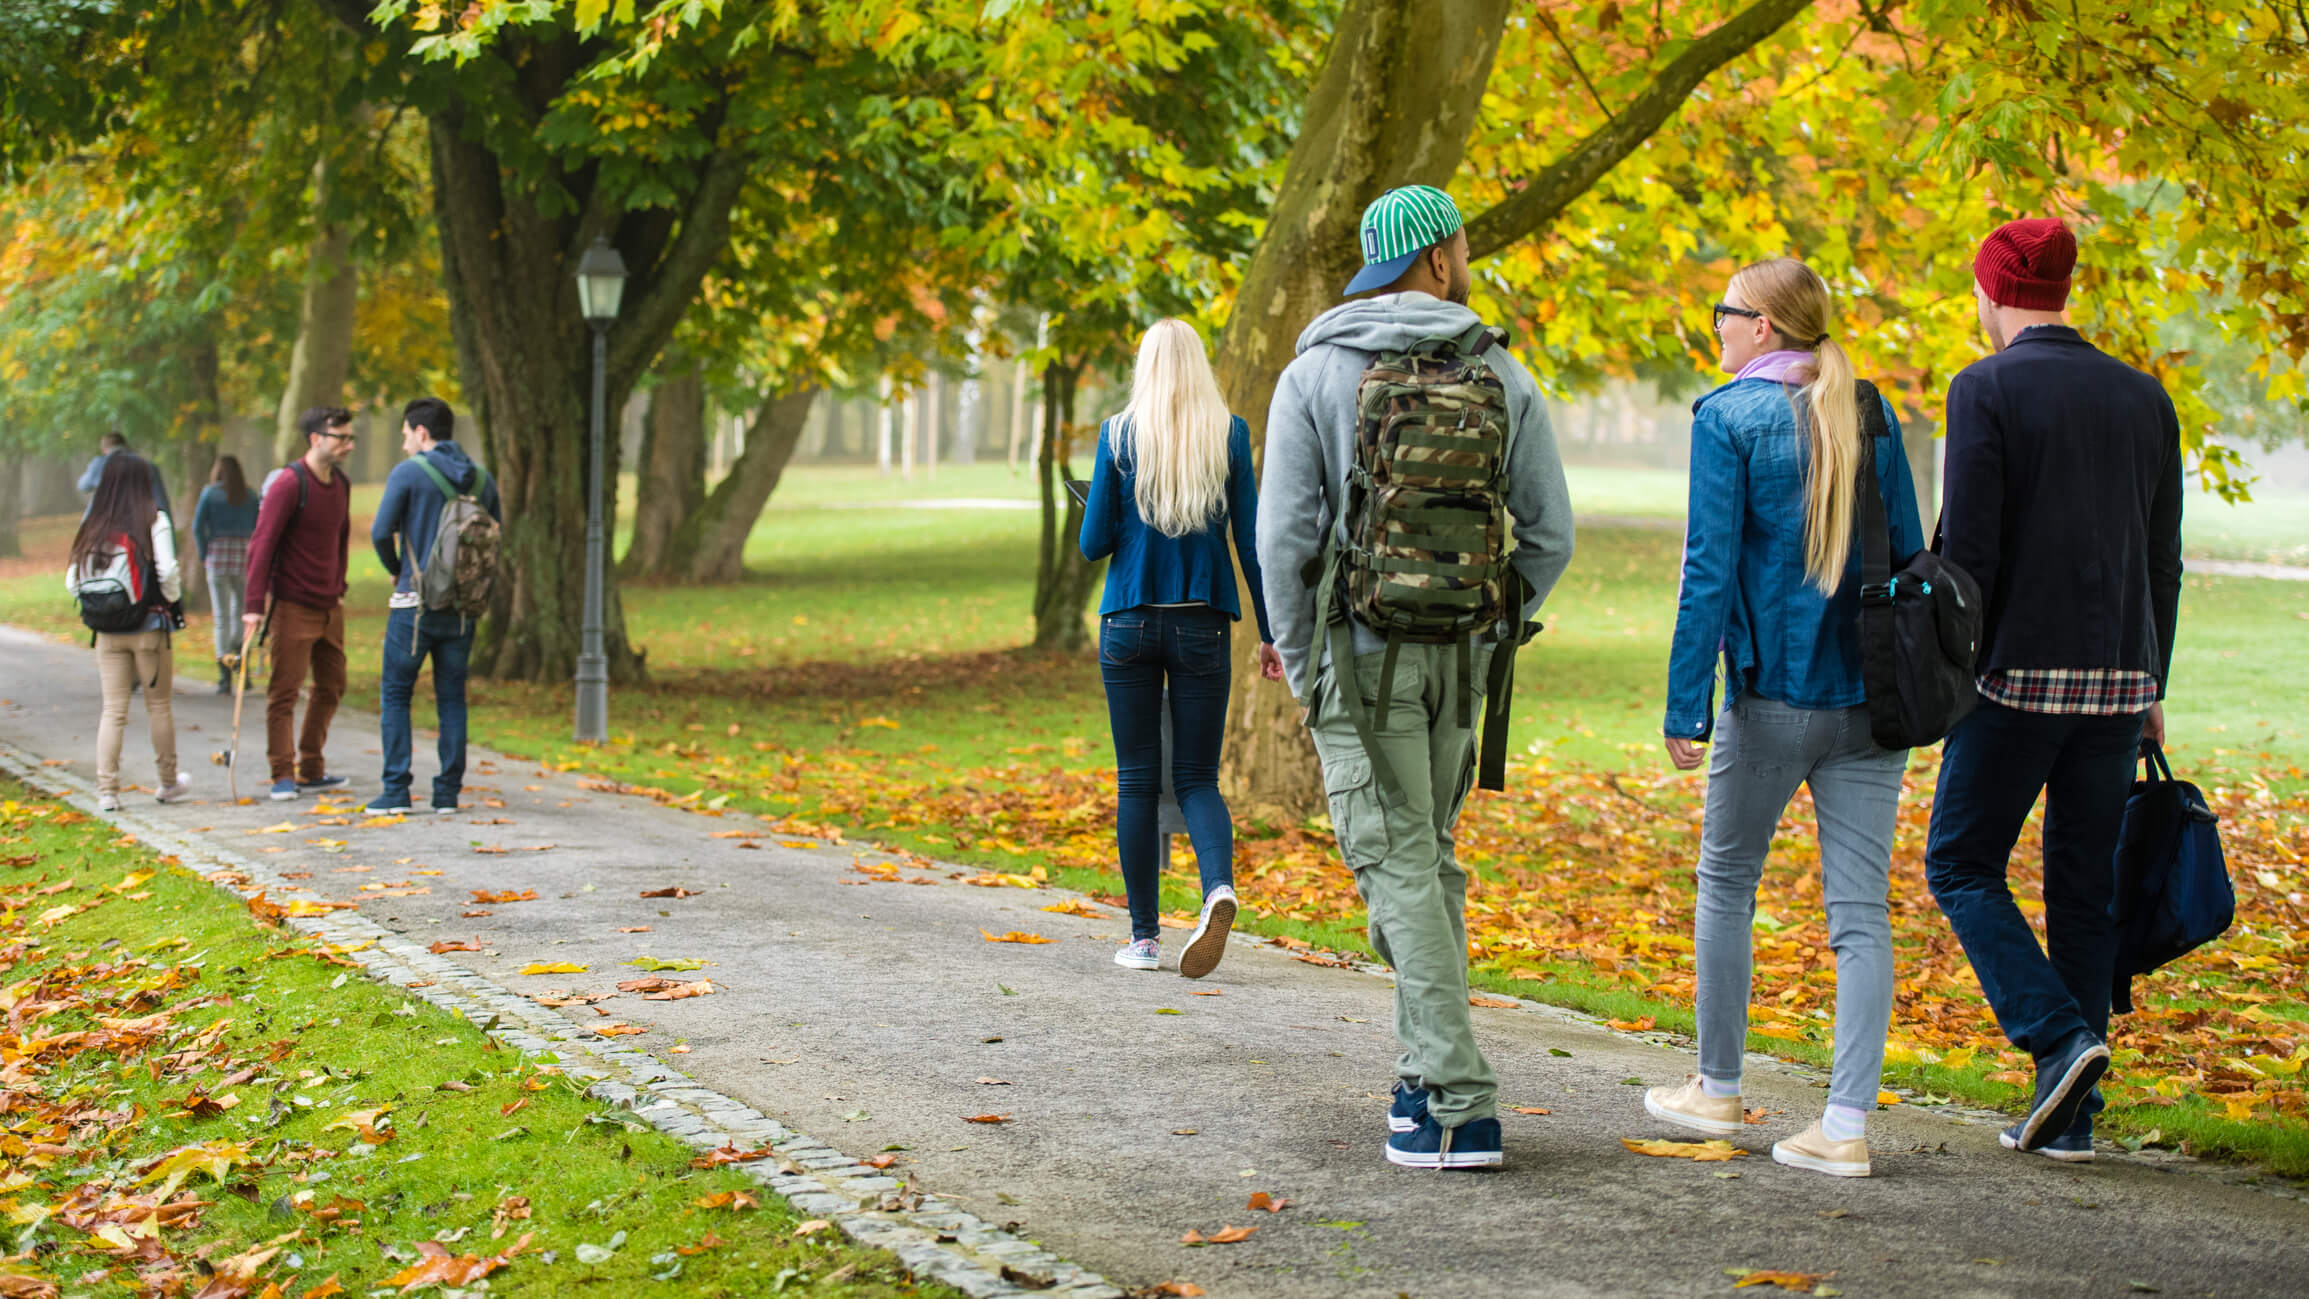 Students walking on a college campus.